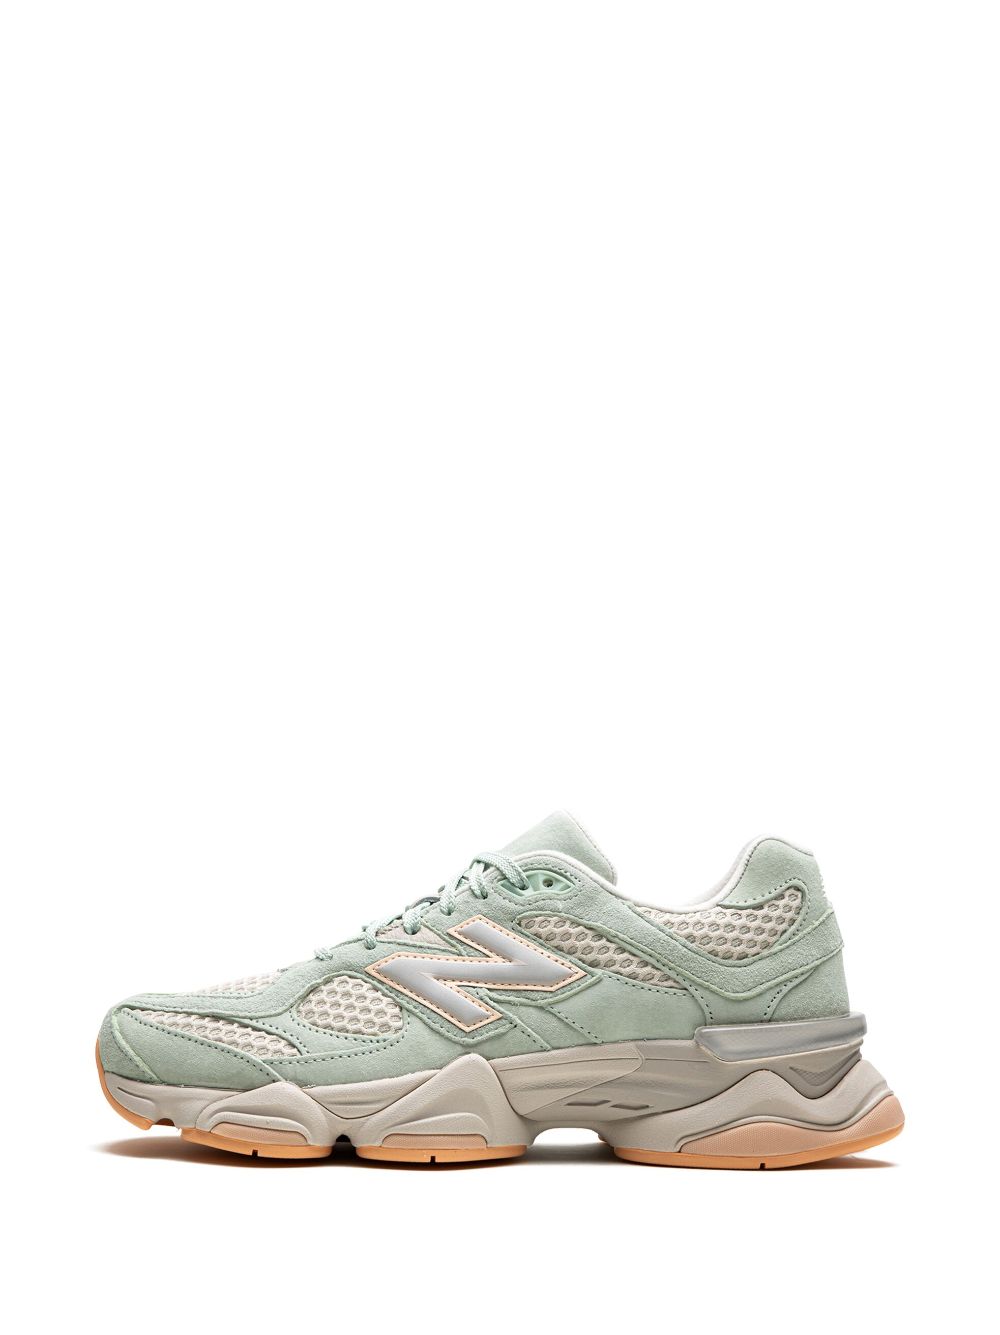 New Balance 9060 The Whitaker Group - Missing Pieces - Moss Green